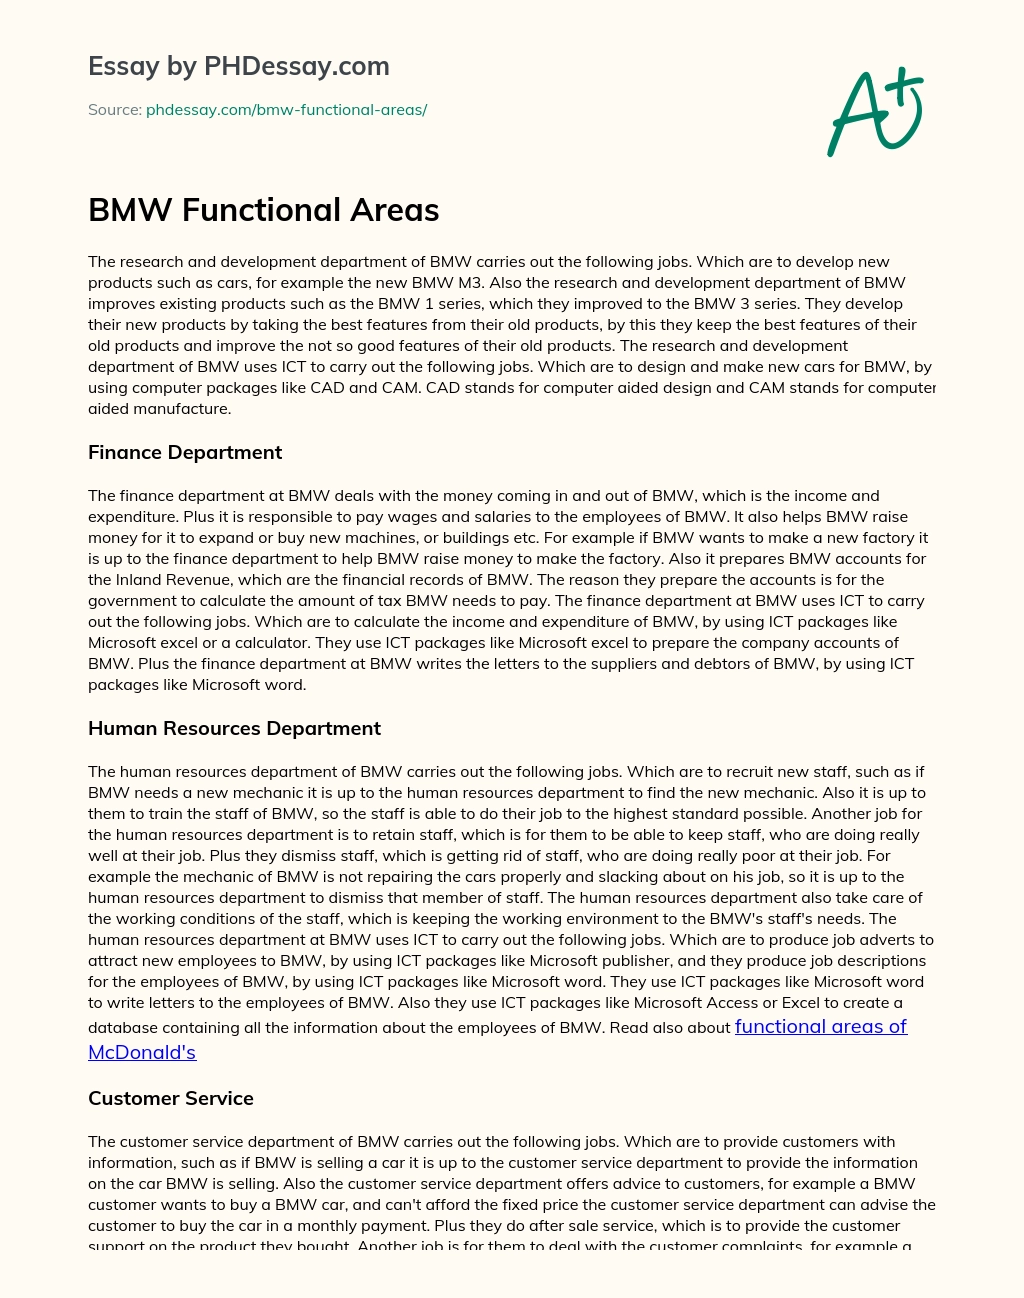 BMW Functional Areas essay